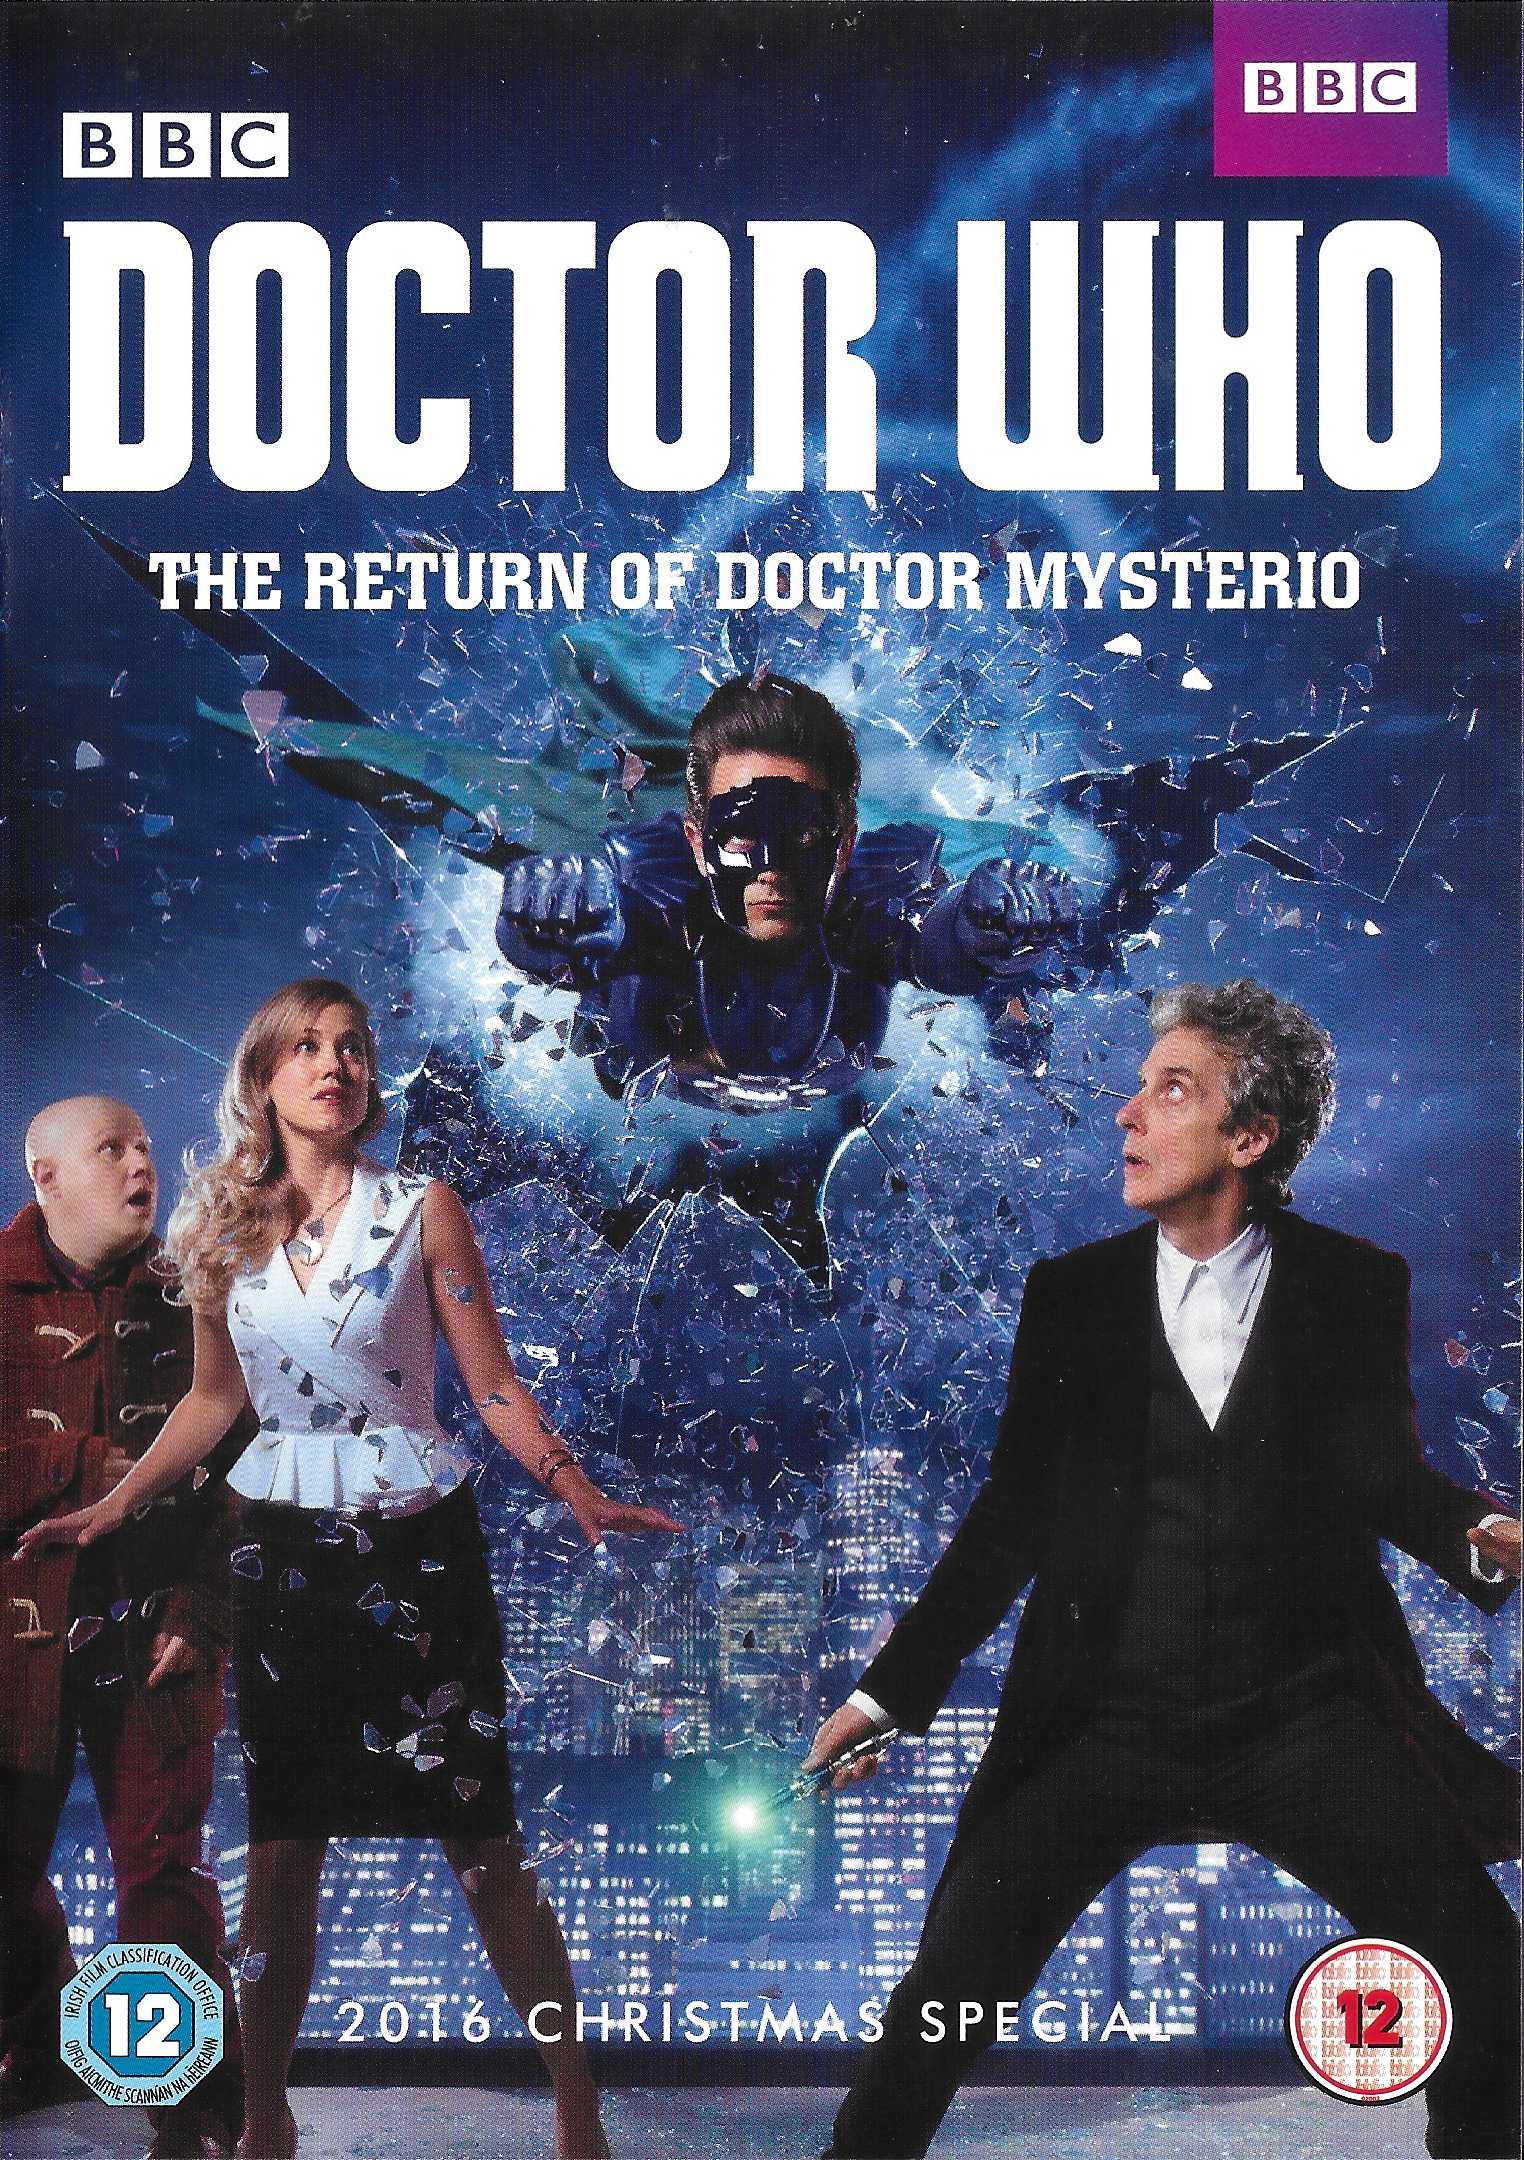 Picture of BBCDVD 4190 Doctor Who - The return of Doctor Mysterio by artist Steven Moffat from the BBC records and Tapes library